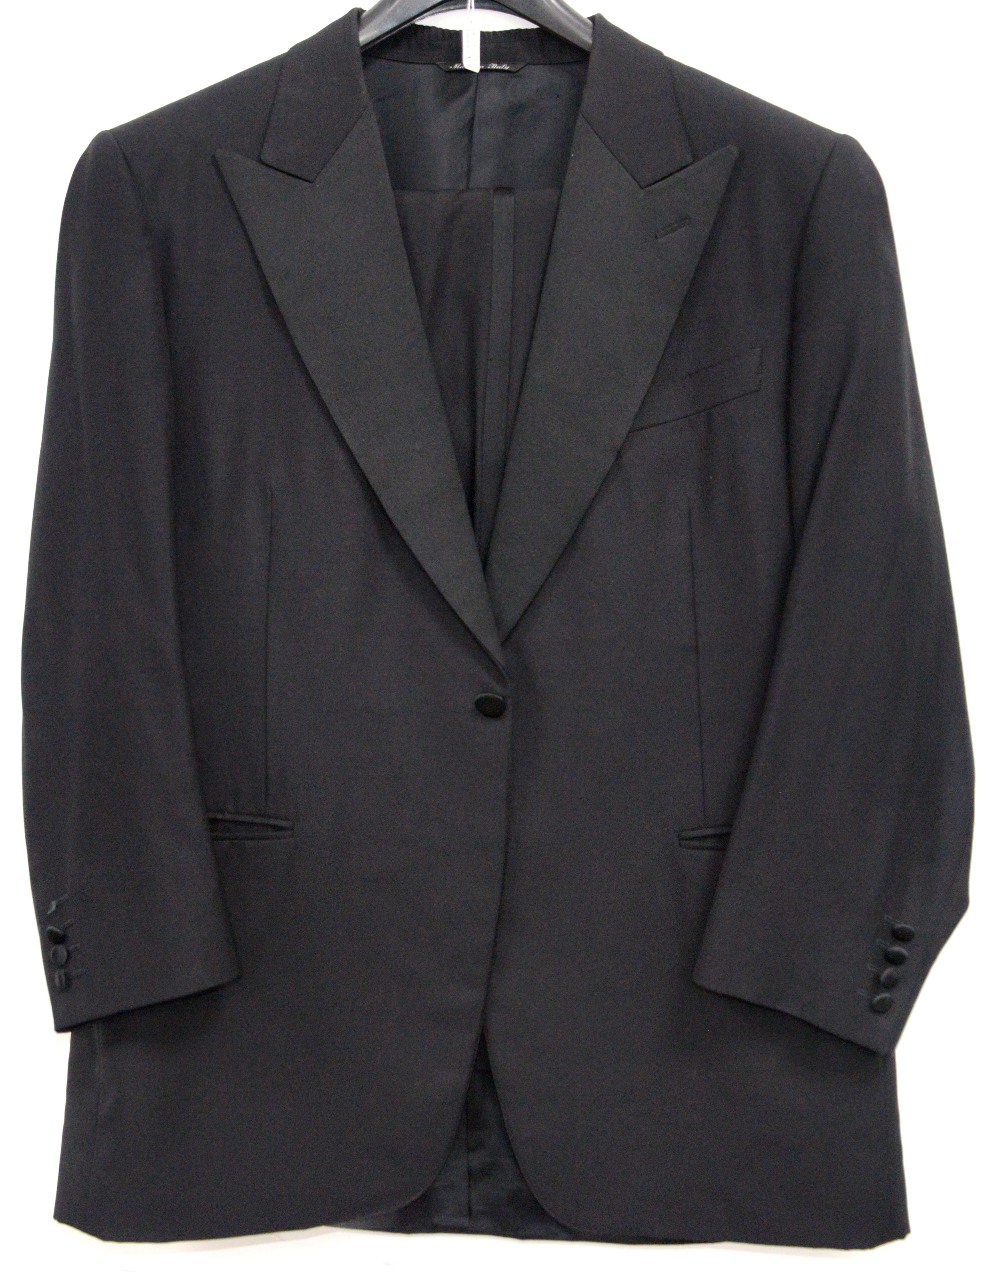 Mans navy blue cashmere mixture city coat with velvet collar and a dinner suit bearing Harrods label - Image 2 of 2